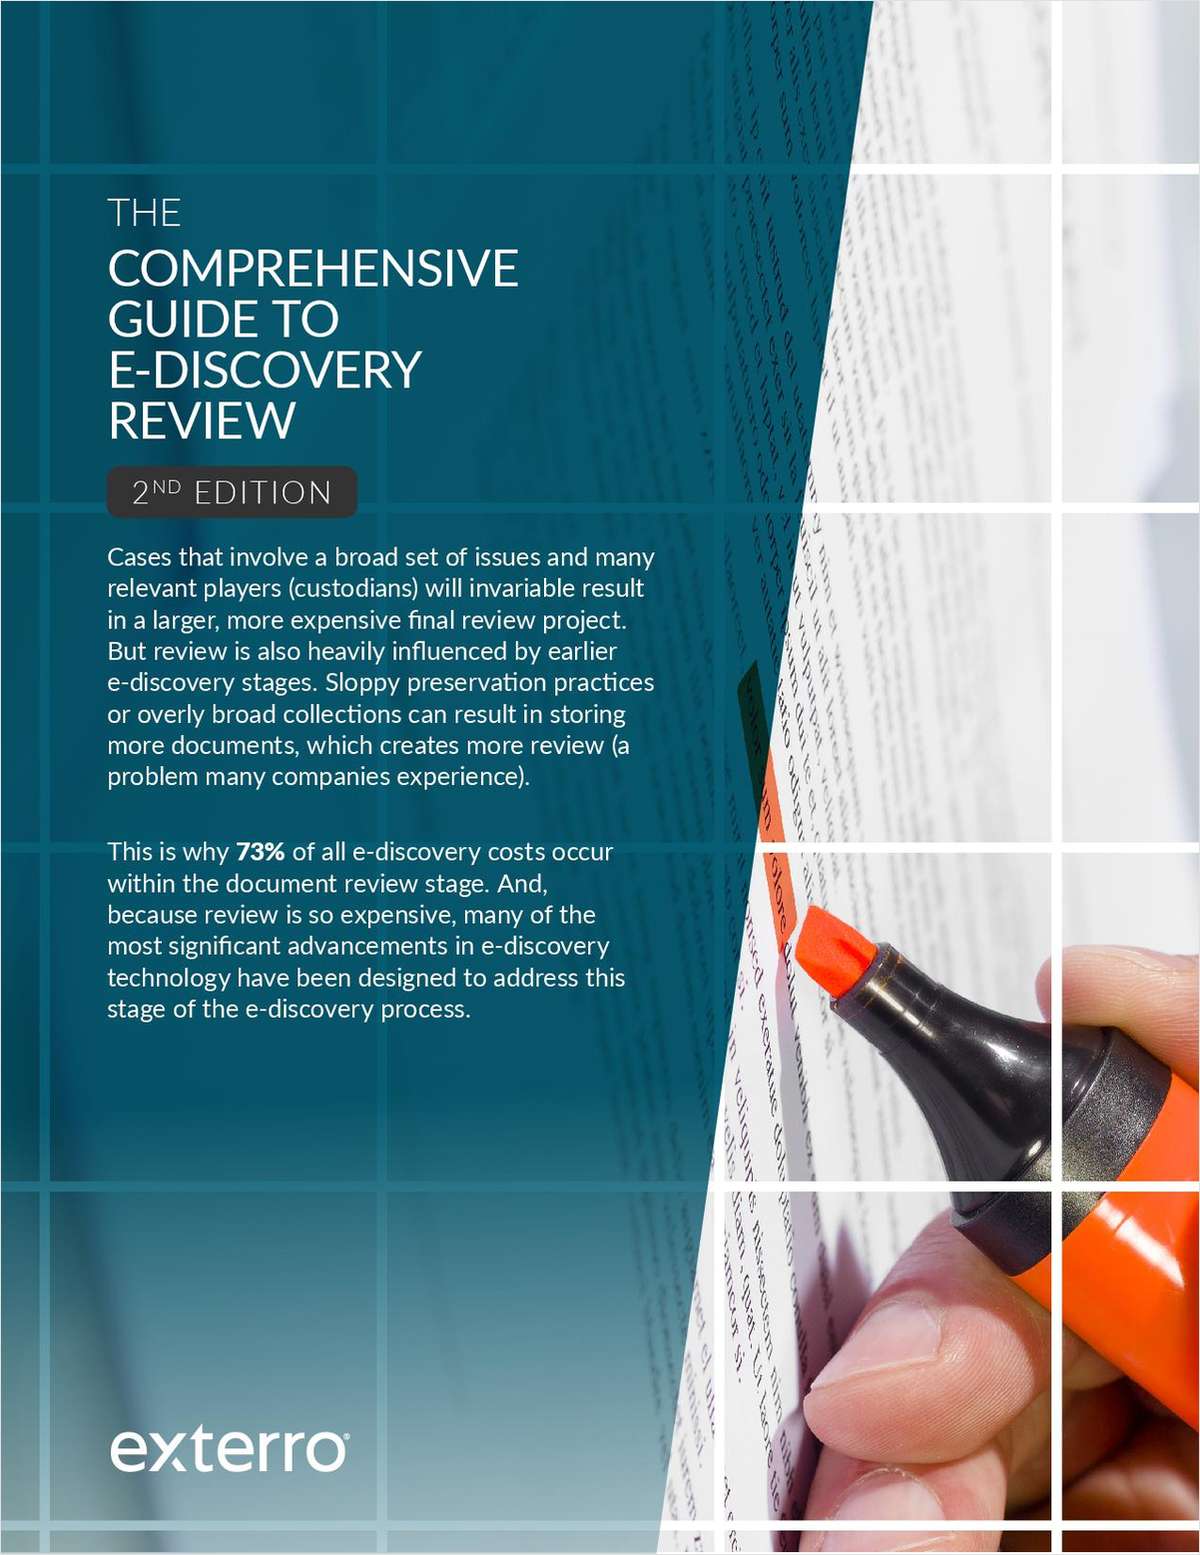 The Comprehensive Guide to E-Discovery Review, 2nd Edition